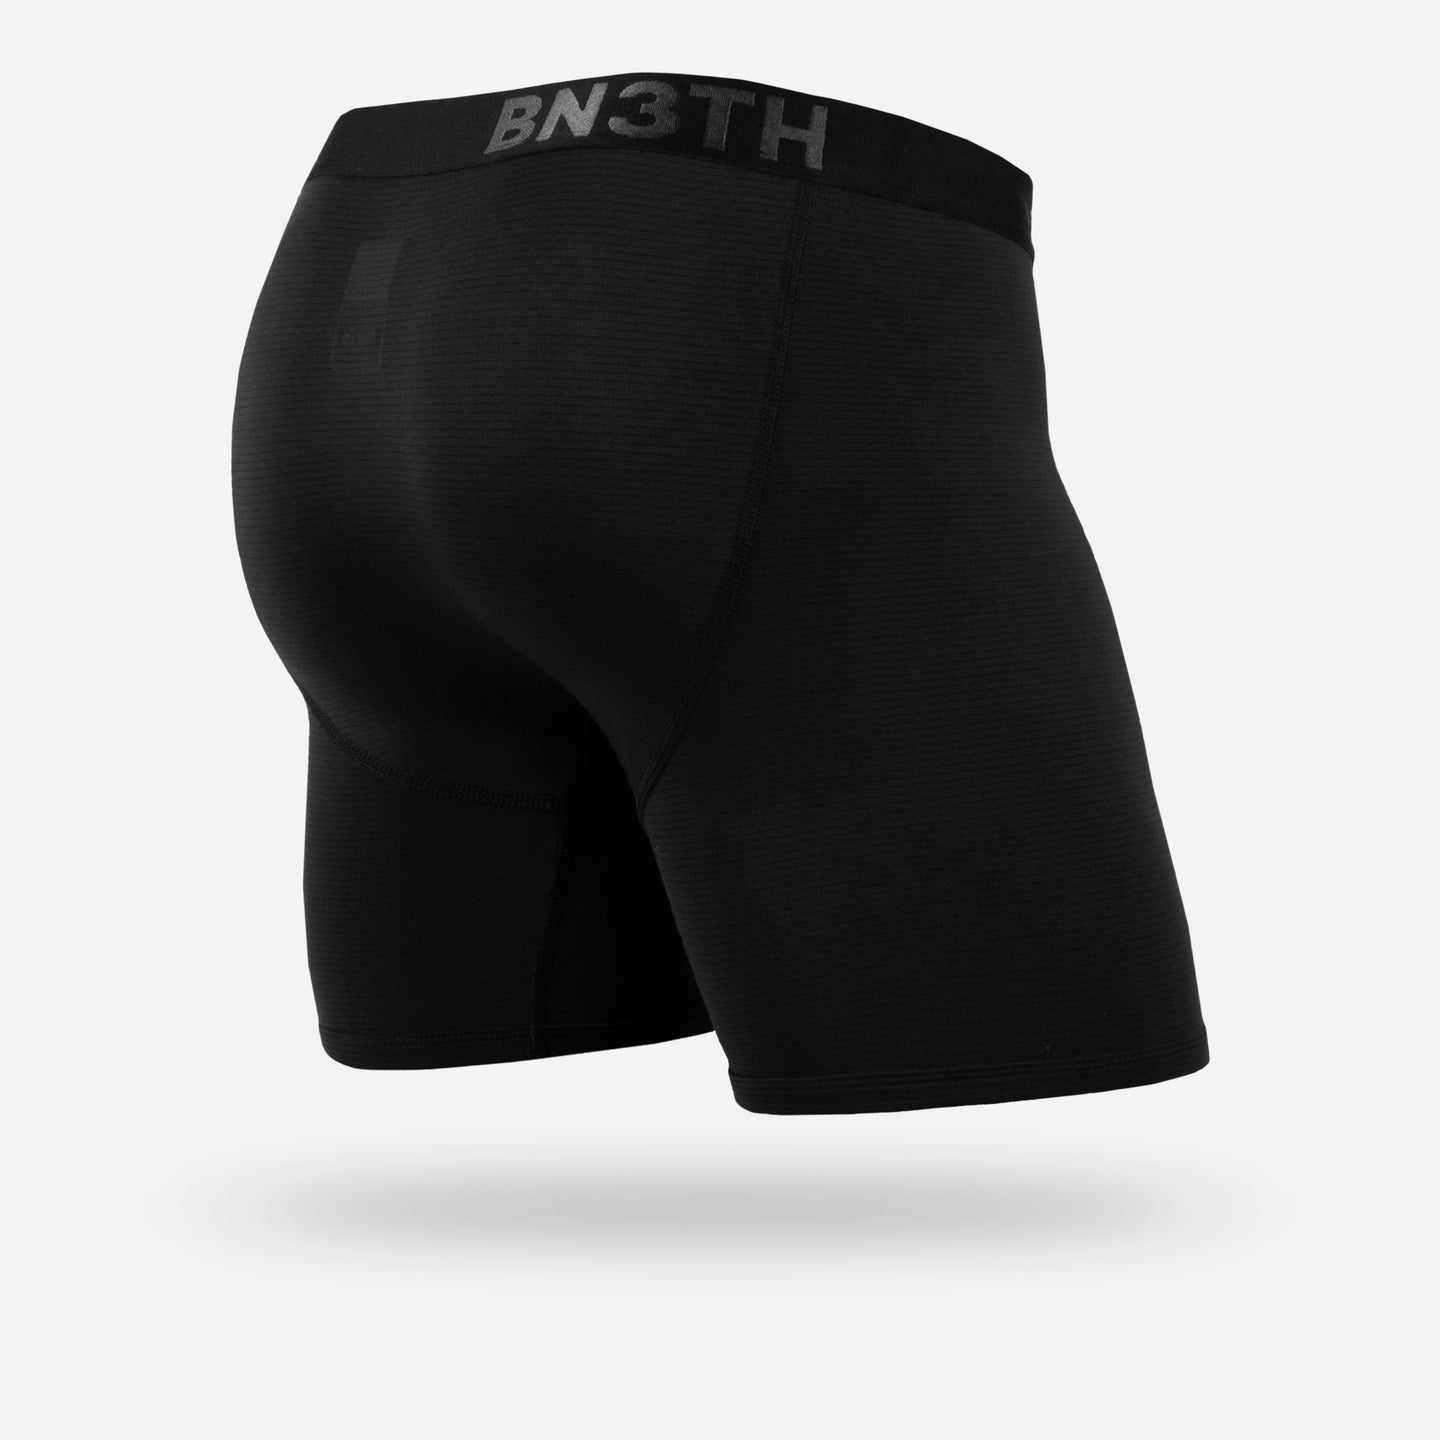 B3NTH PRO with Ionic+ Boxer Brief- Black